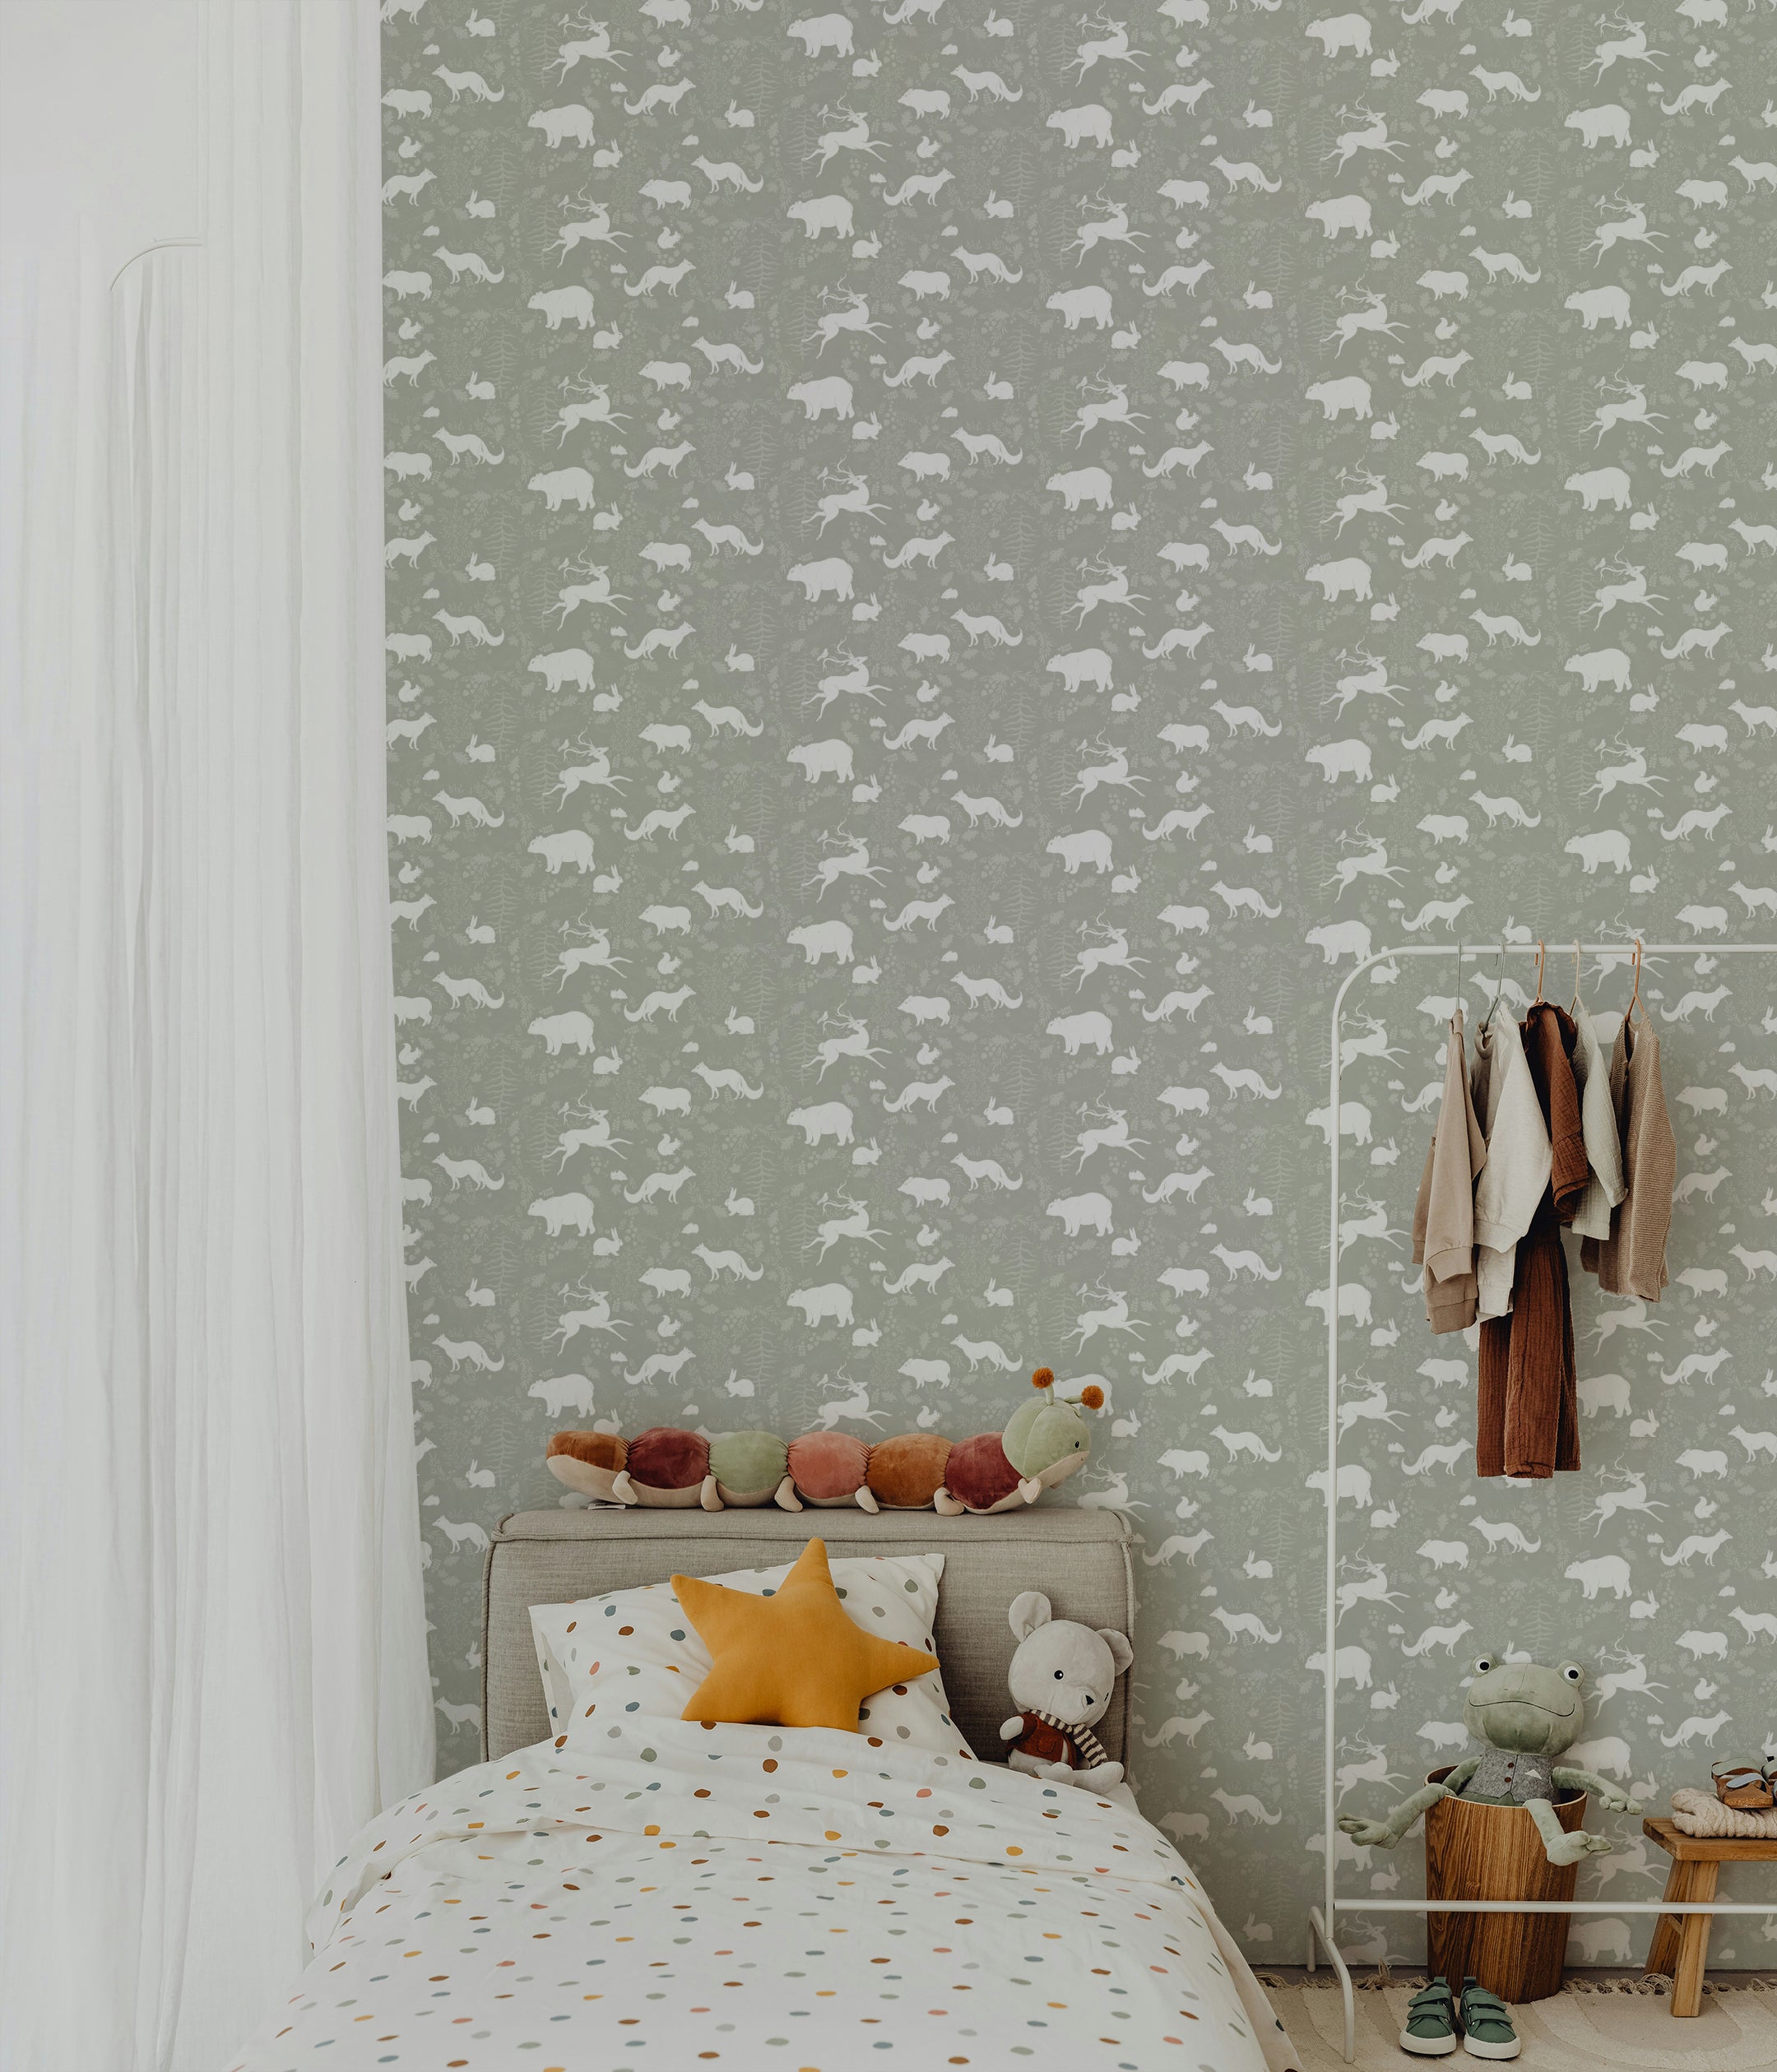 A cozy kids' room decorated with the Forest Silhouettes Wallpaper, featuring white animal silhouettes on a muted green background. A bed with colorful plush toys and a star-shaped pillow, along with a clothing rack and storage bin, create a playful and inviting space.